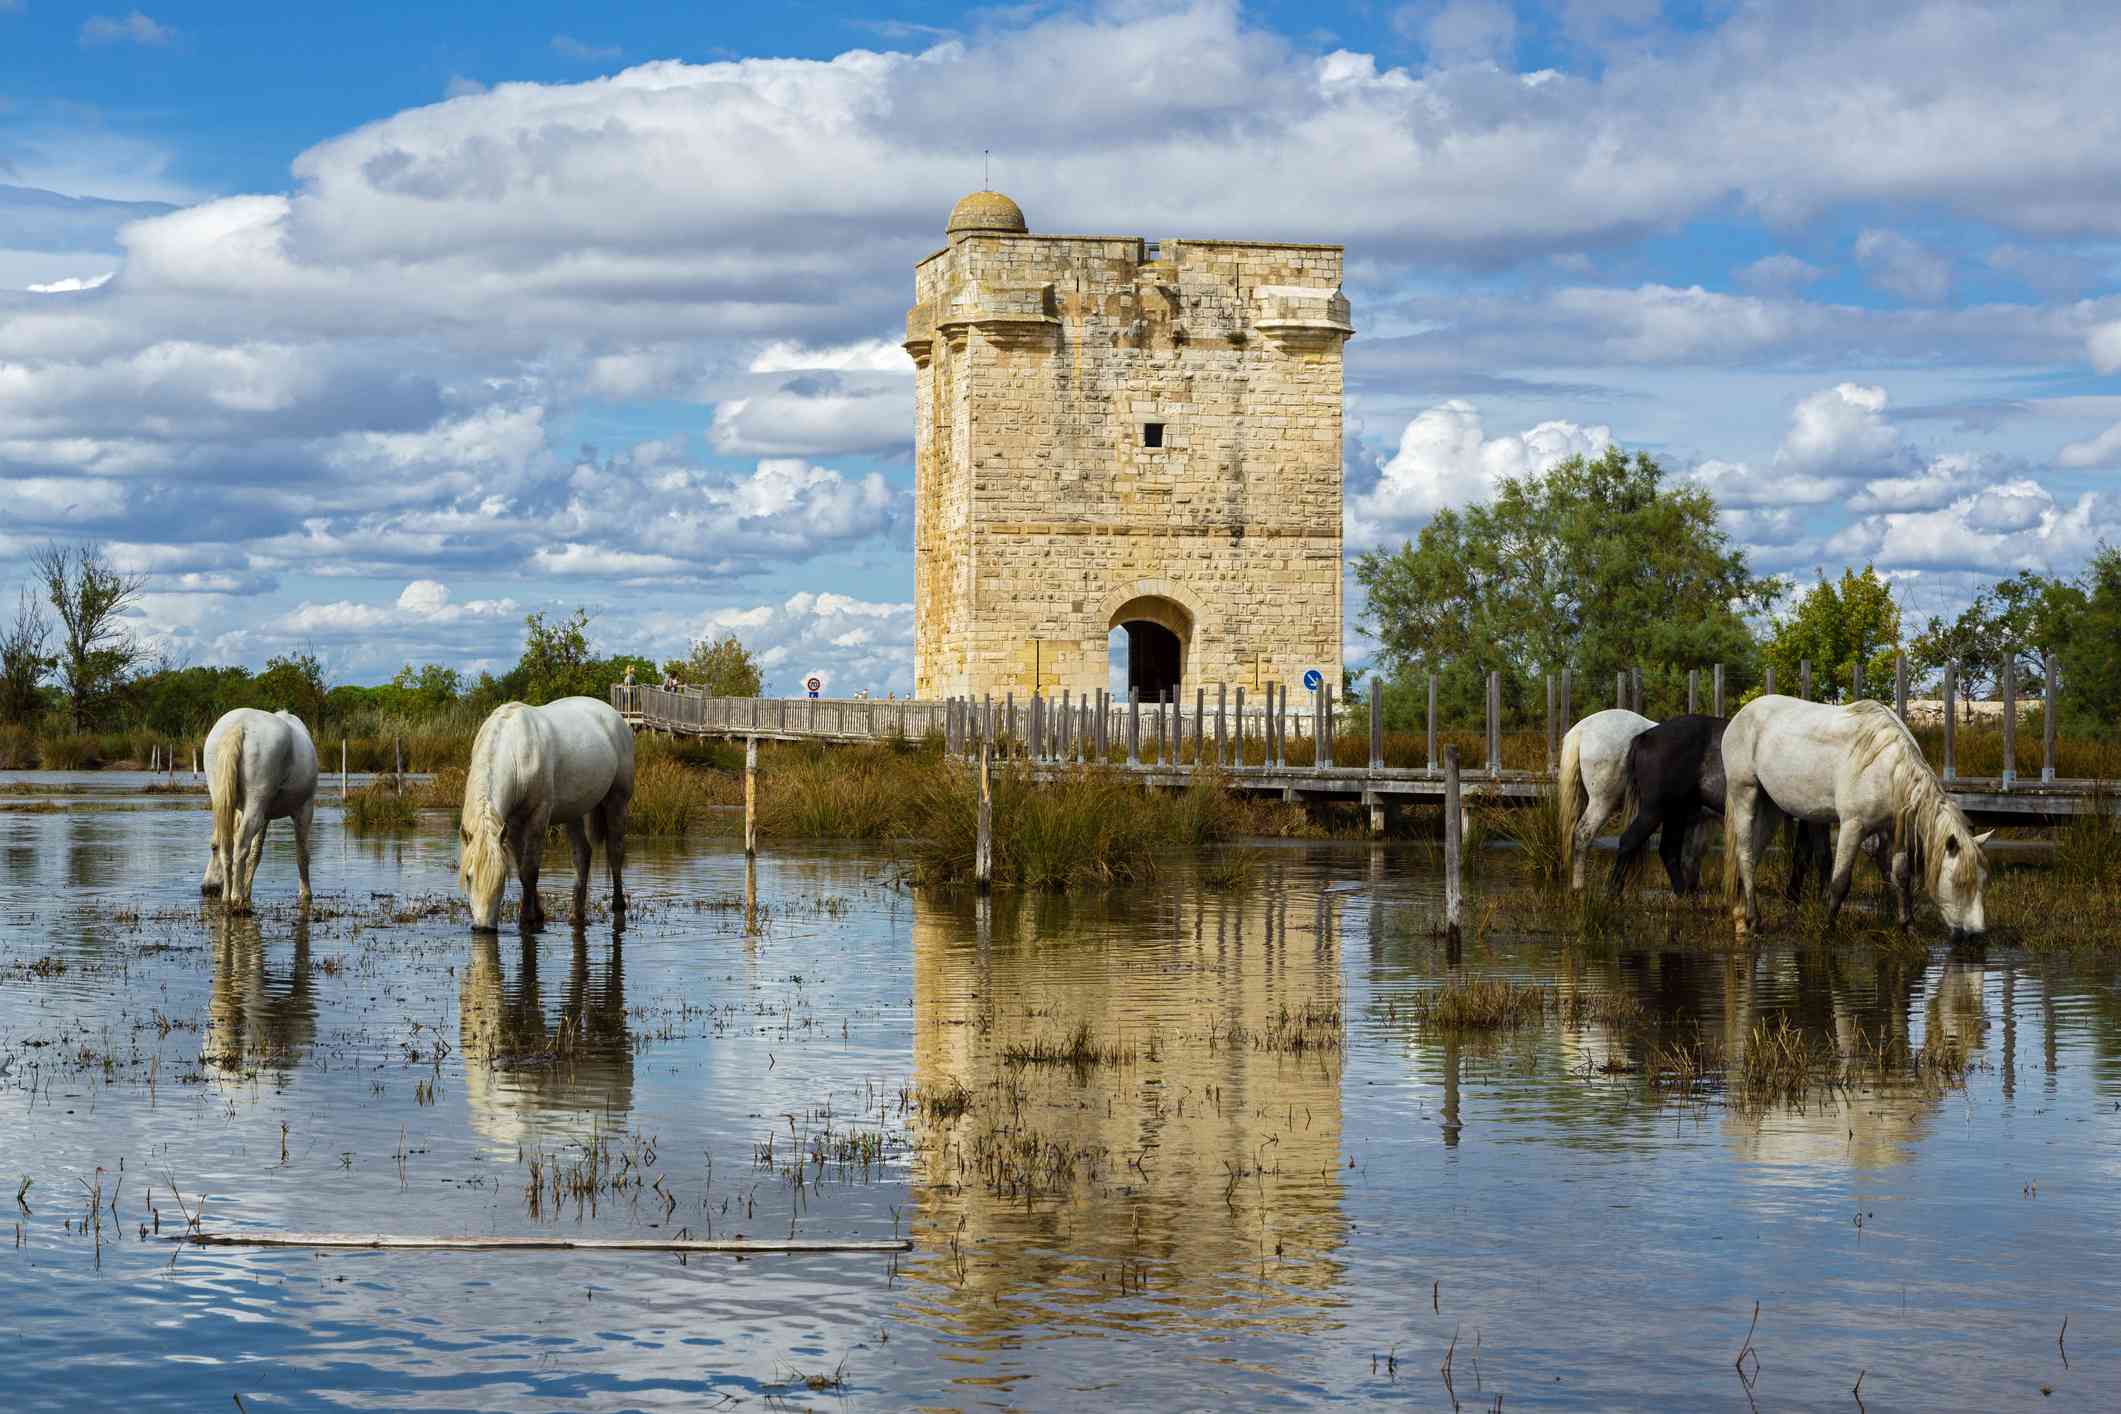 The Camargue, a land of tradition and wilderness